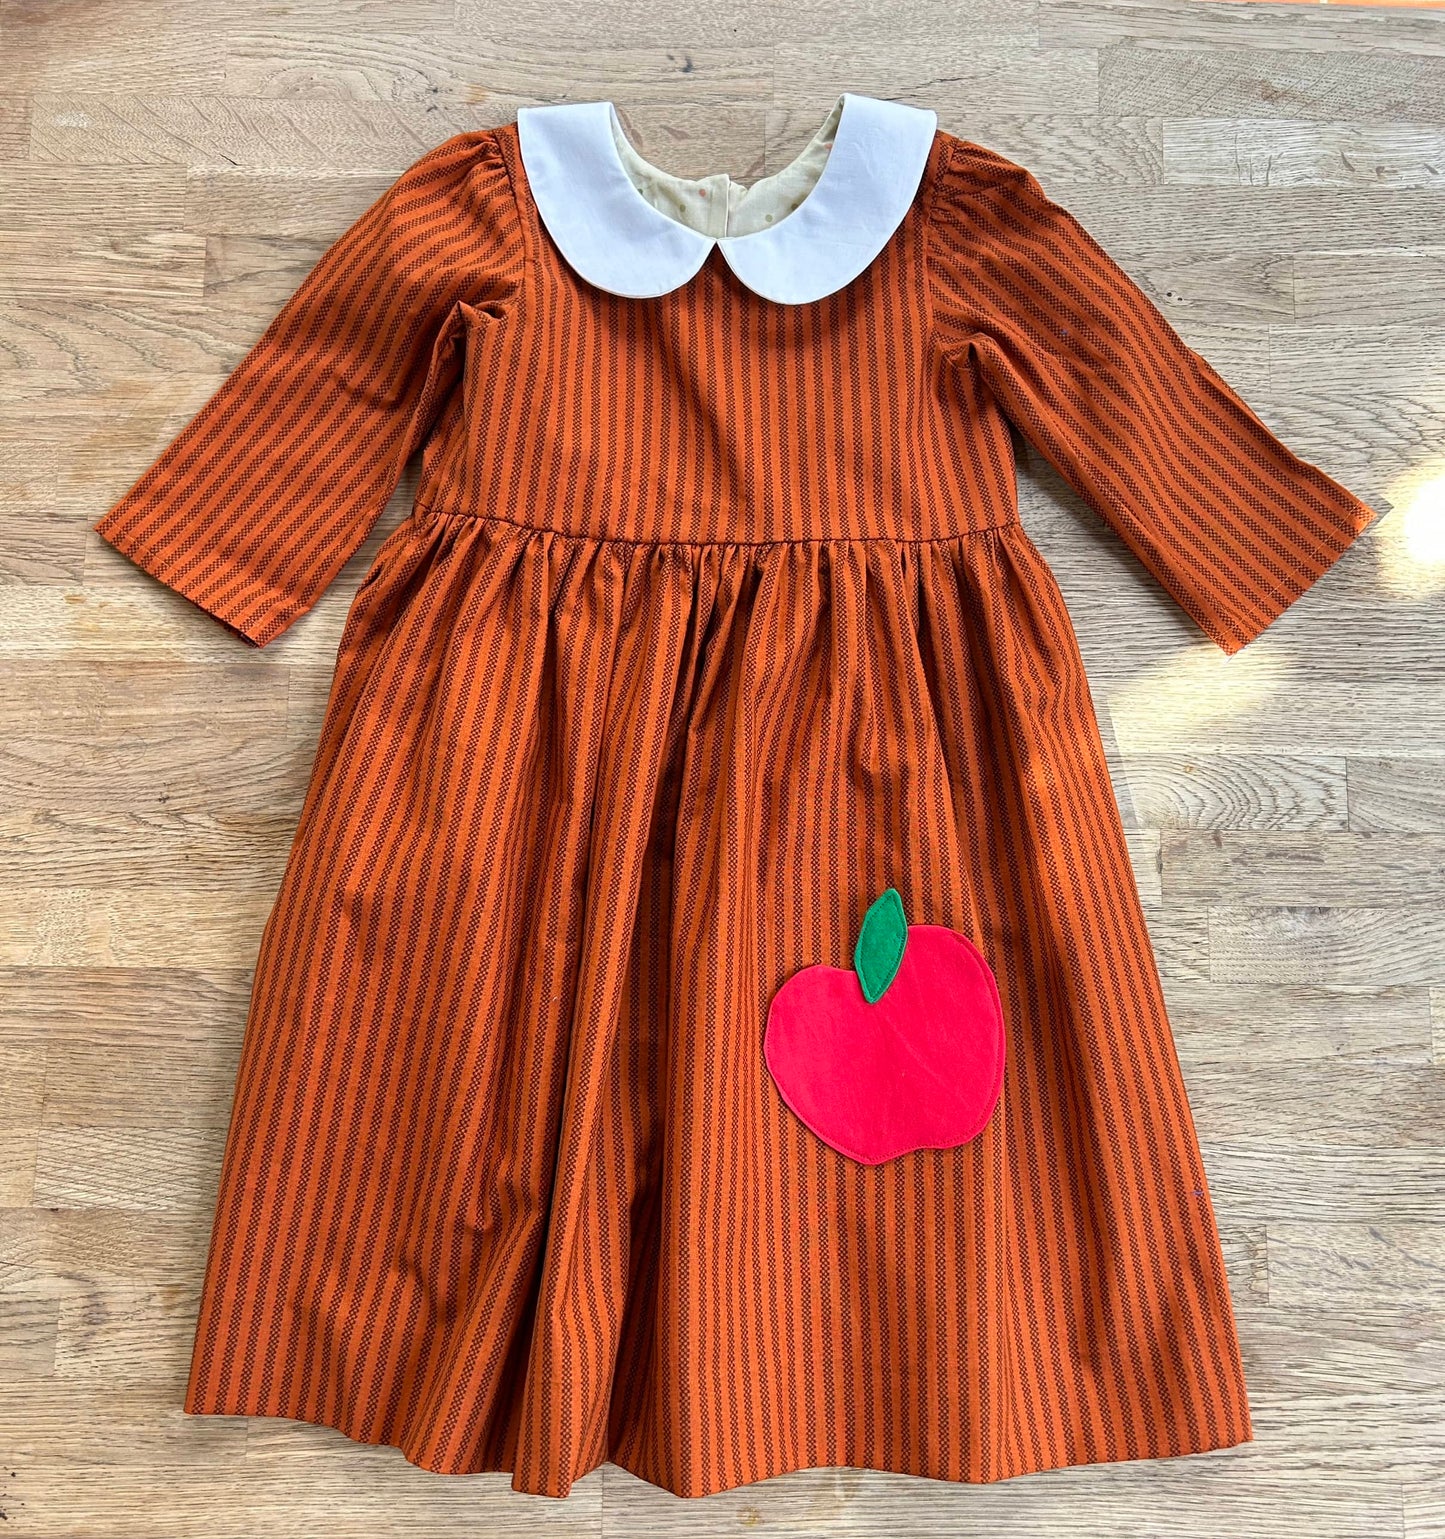 Striped Apple Dress with 3/4 length sleeves (SAMPLE) Size 6